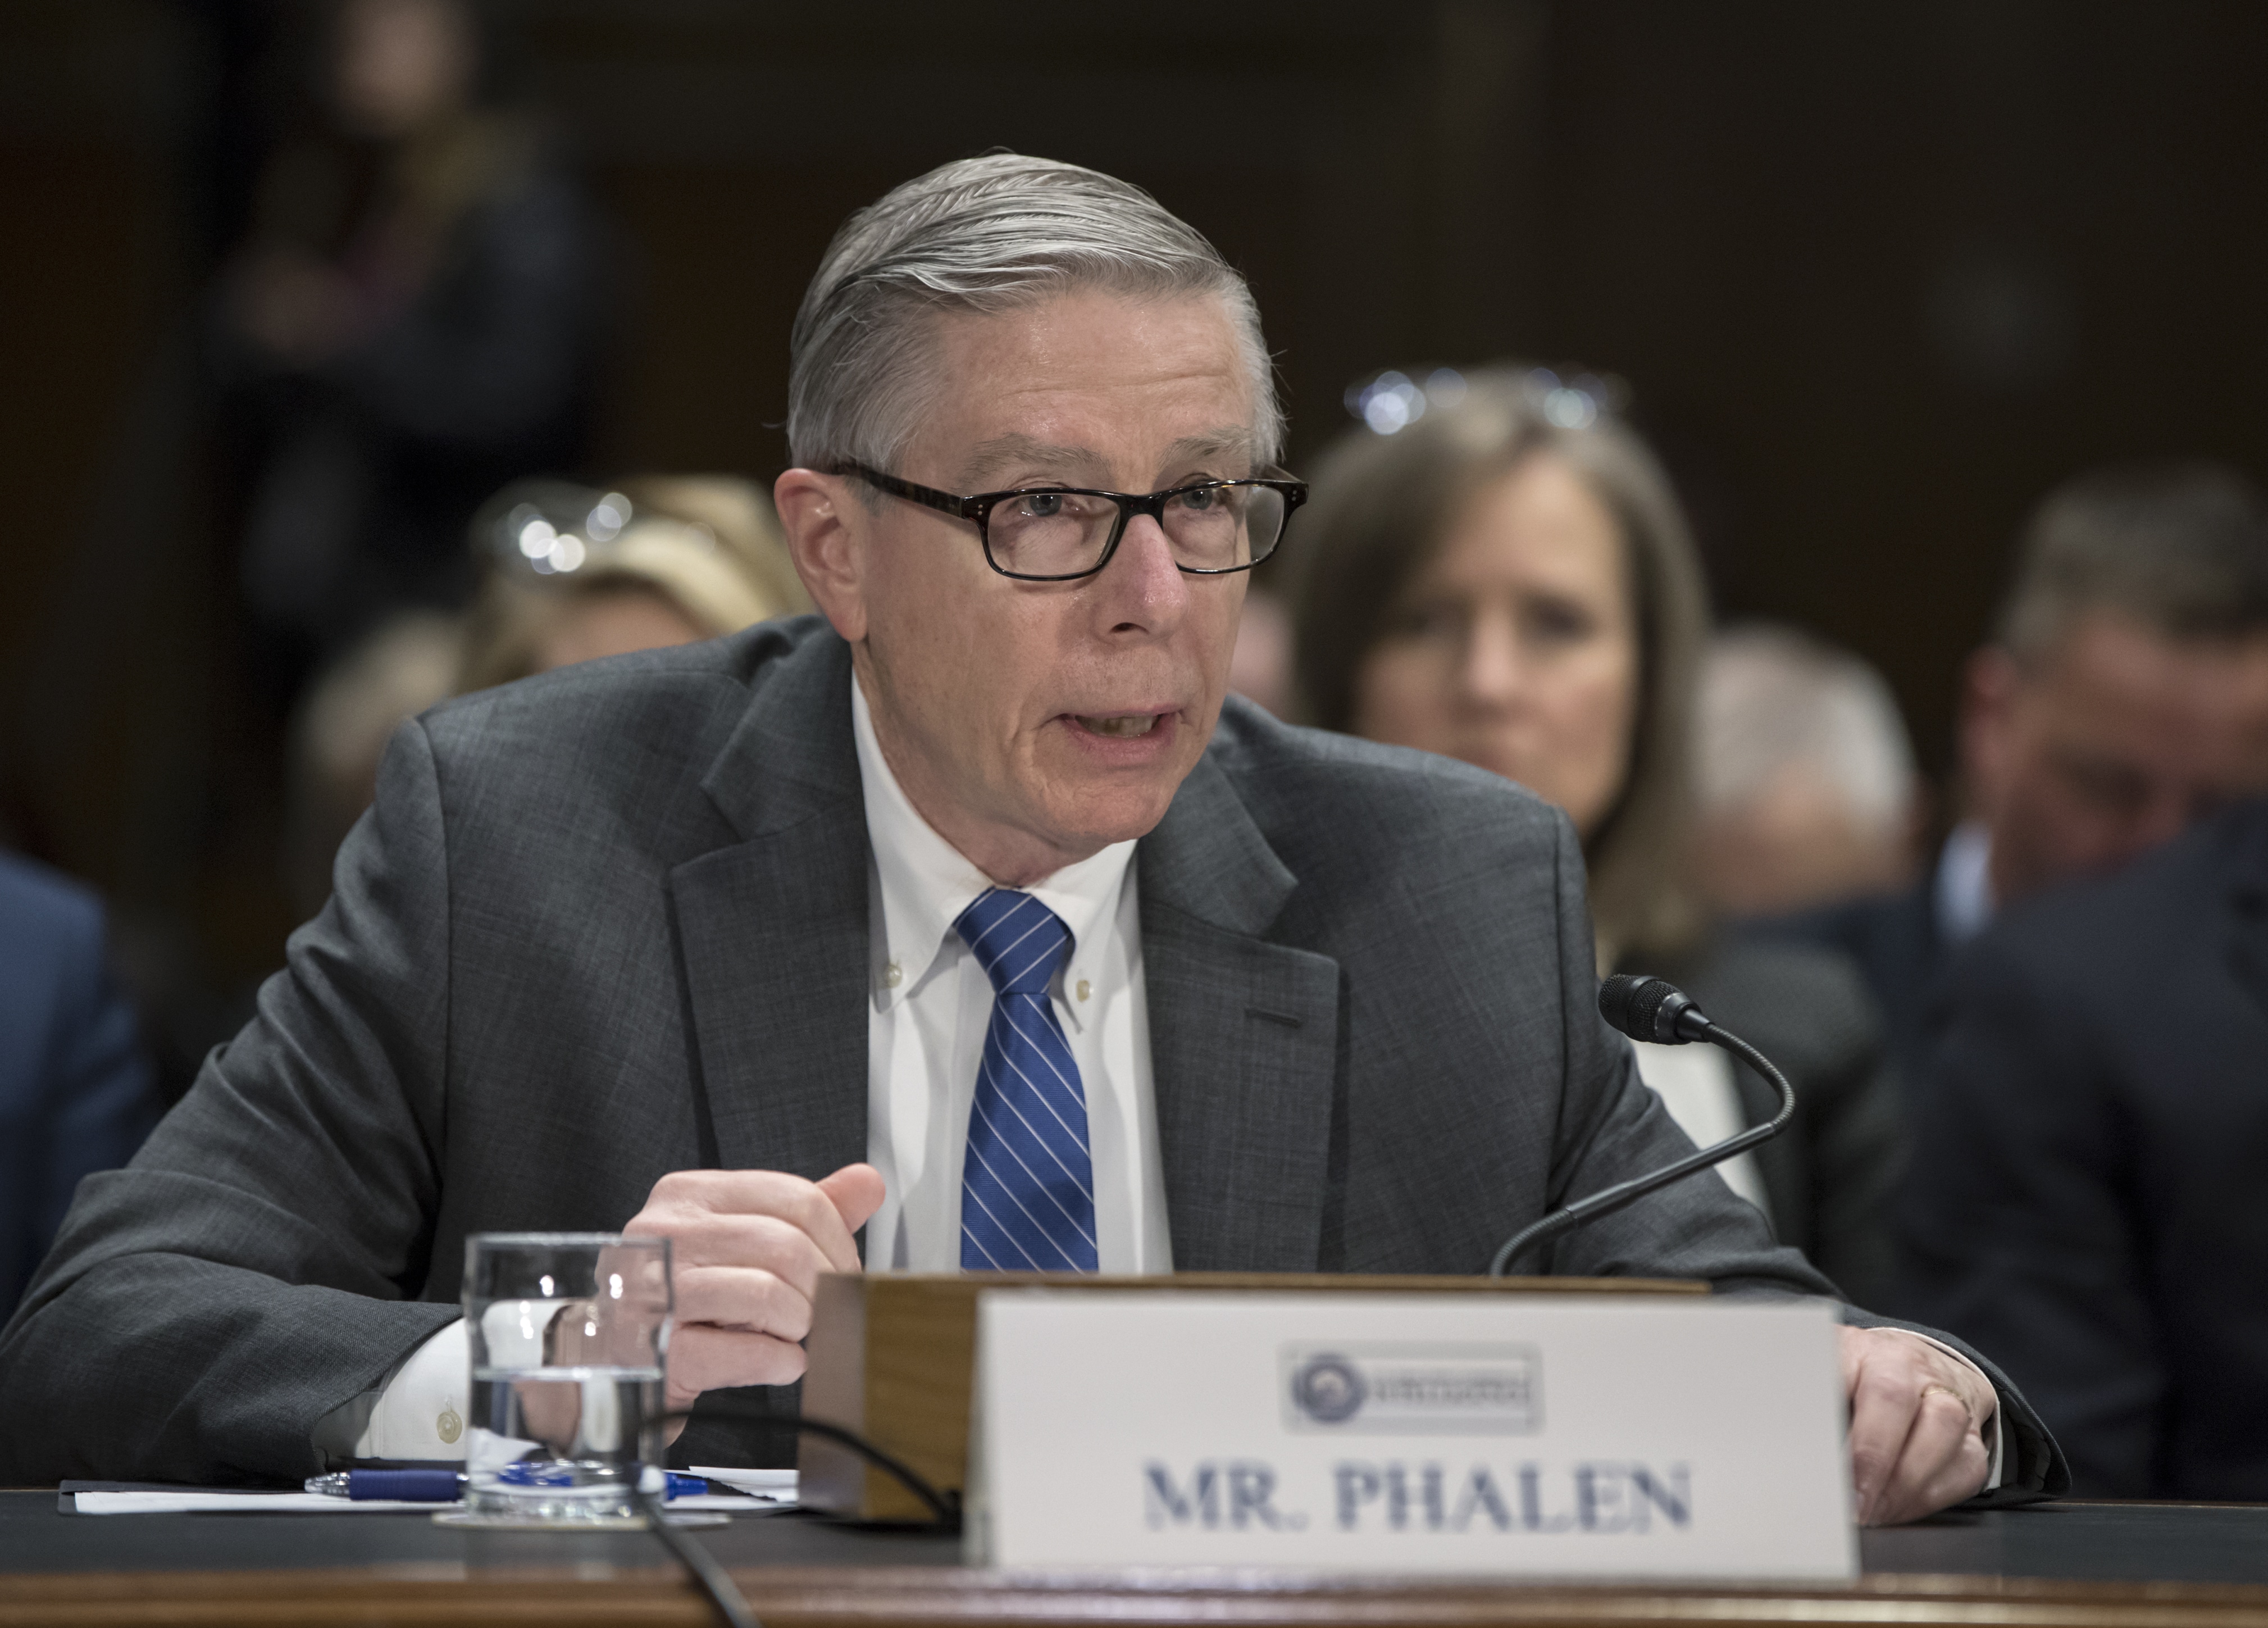 National Background Investigation Bureau Director Charlie Phalen testifies before the Senate Intelligence Committee as lawmakers examine problems and practices of issuing security clearances to government employees, at the Capitol in Washington, Wednesday, March 7, 2018.